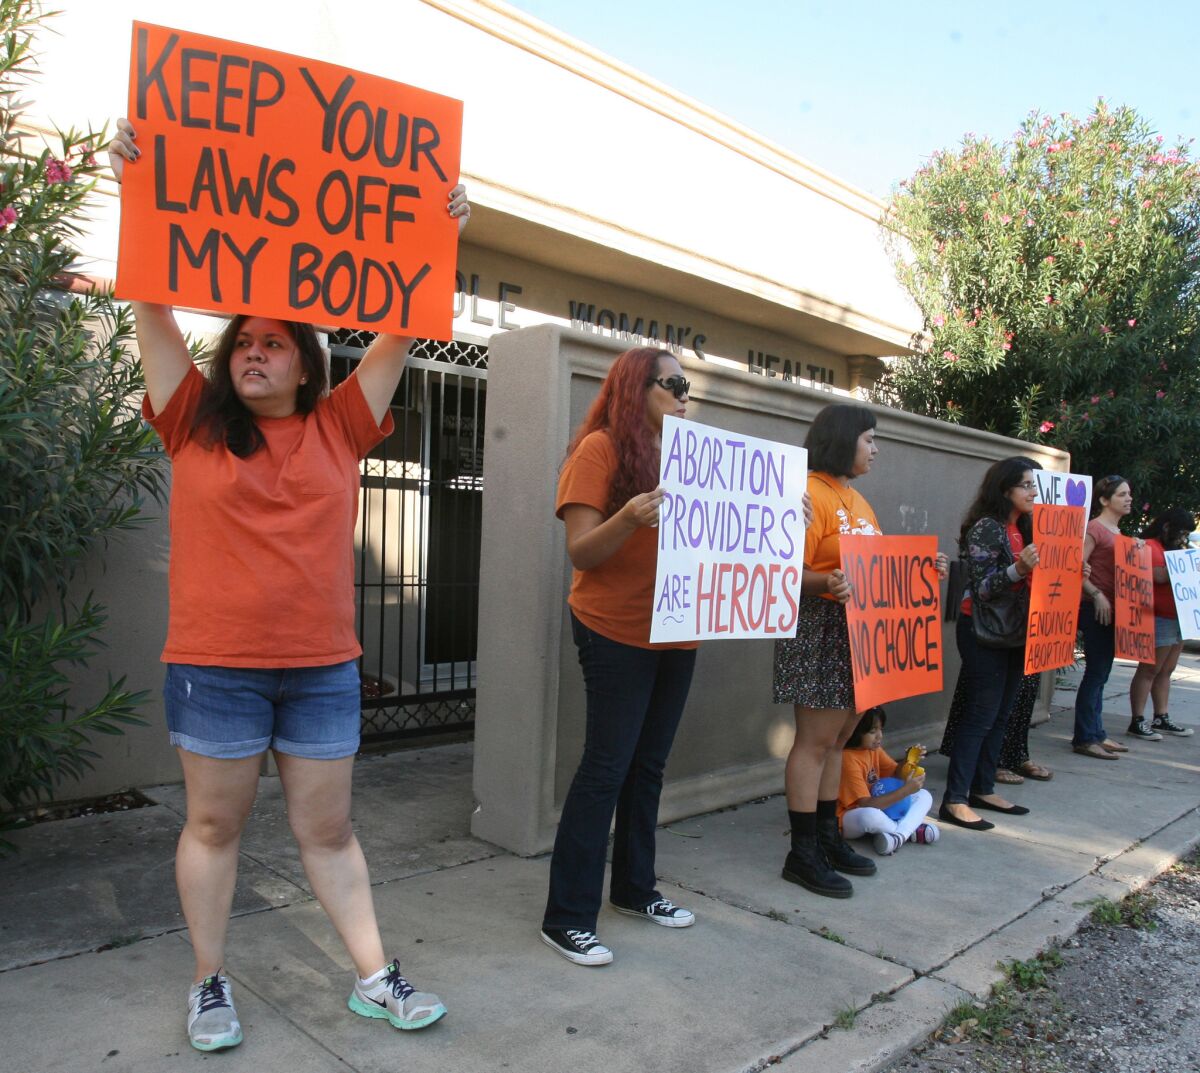 People protest in front of the Whole Women's Health clinic in McAllen, Texas.